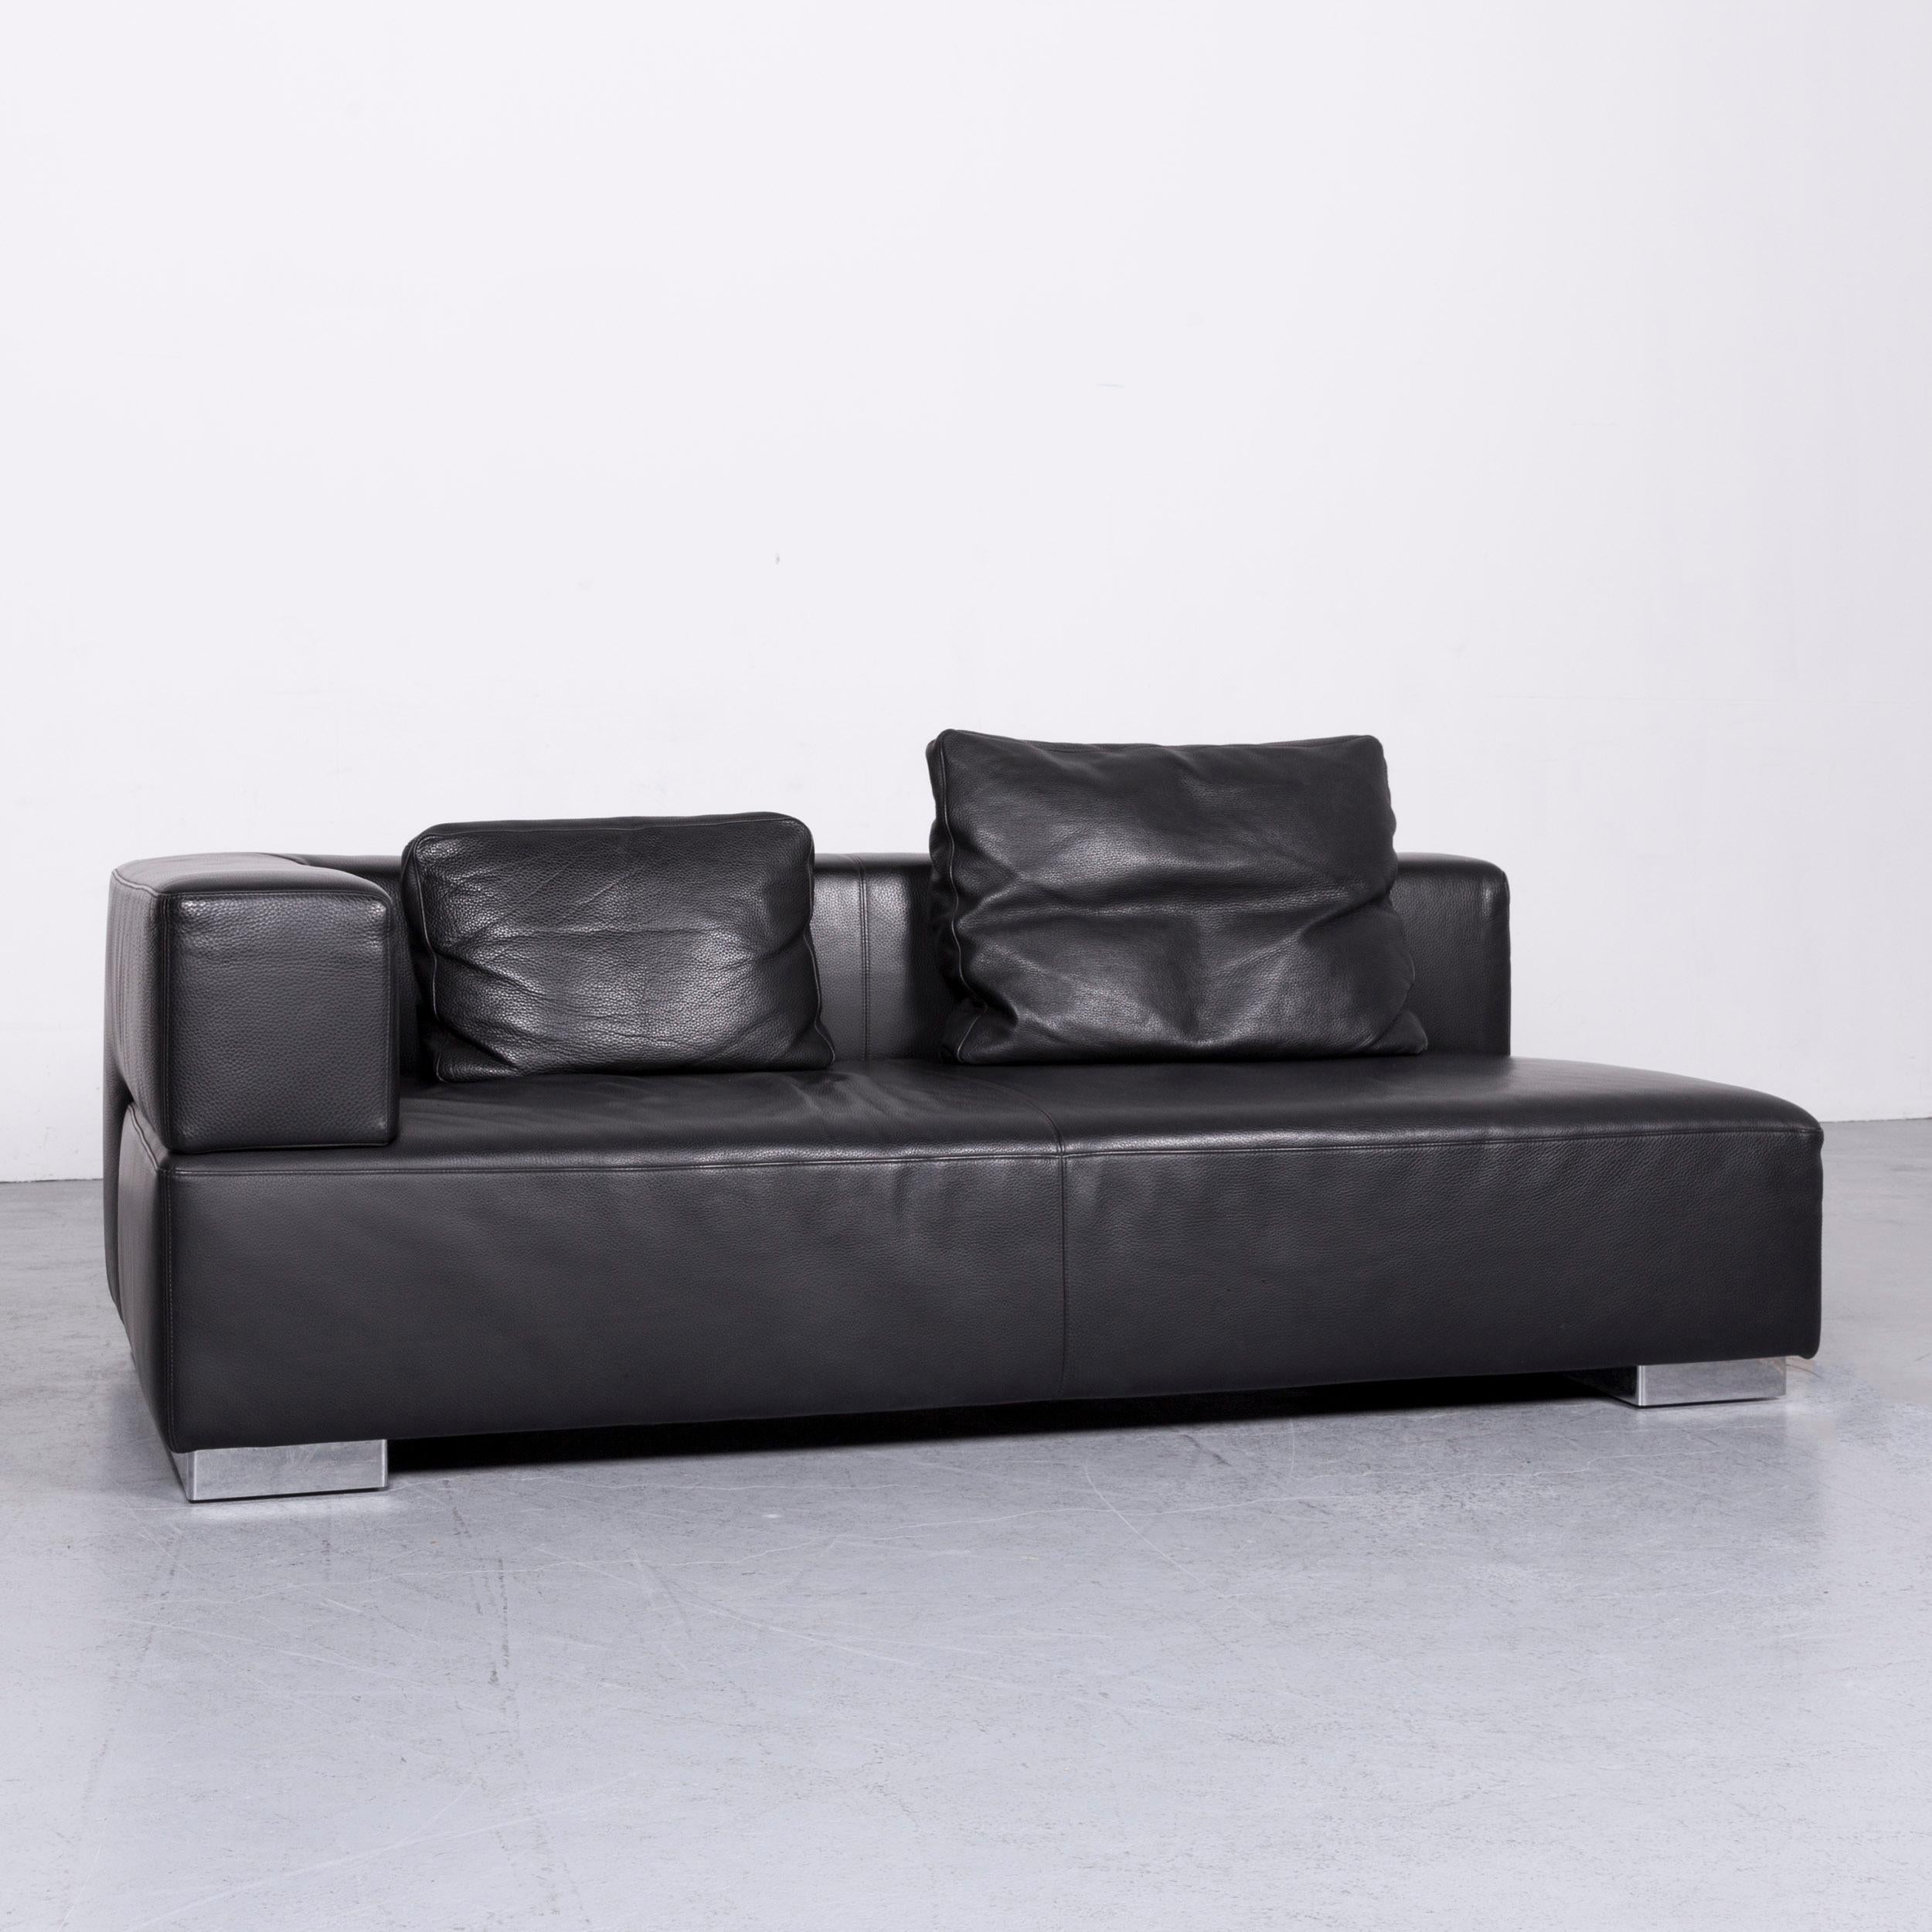 German Brühl & Sippold Designer Sofa Set Leather Black Two-Seat Couch Modern For Sale